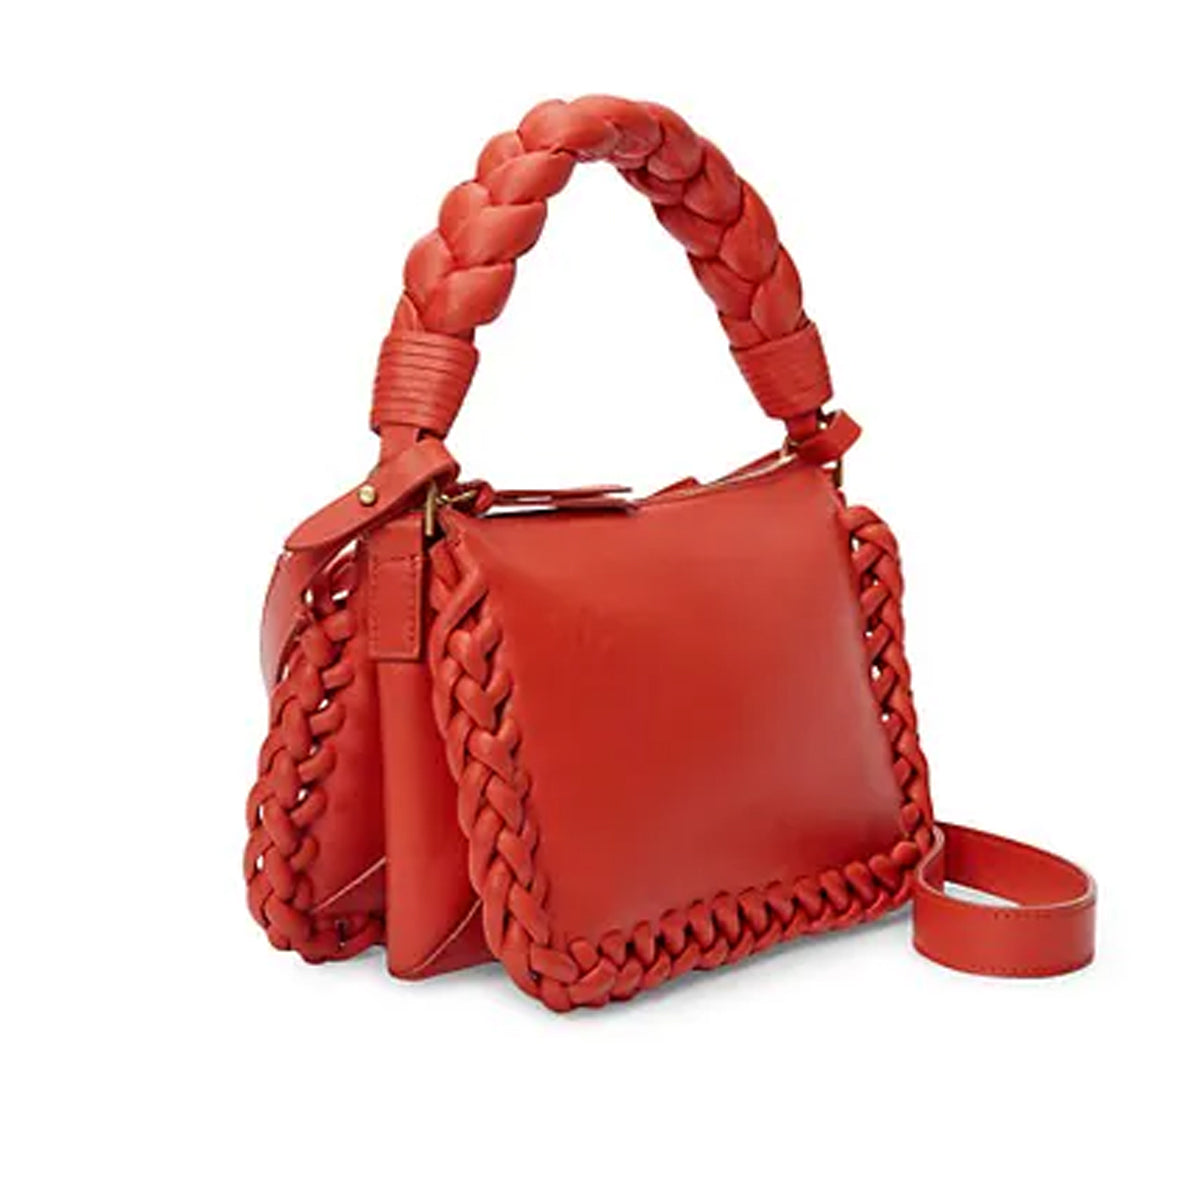 Braided Top Handle Small Bag in Red